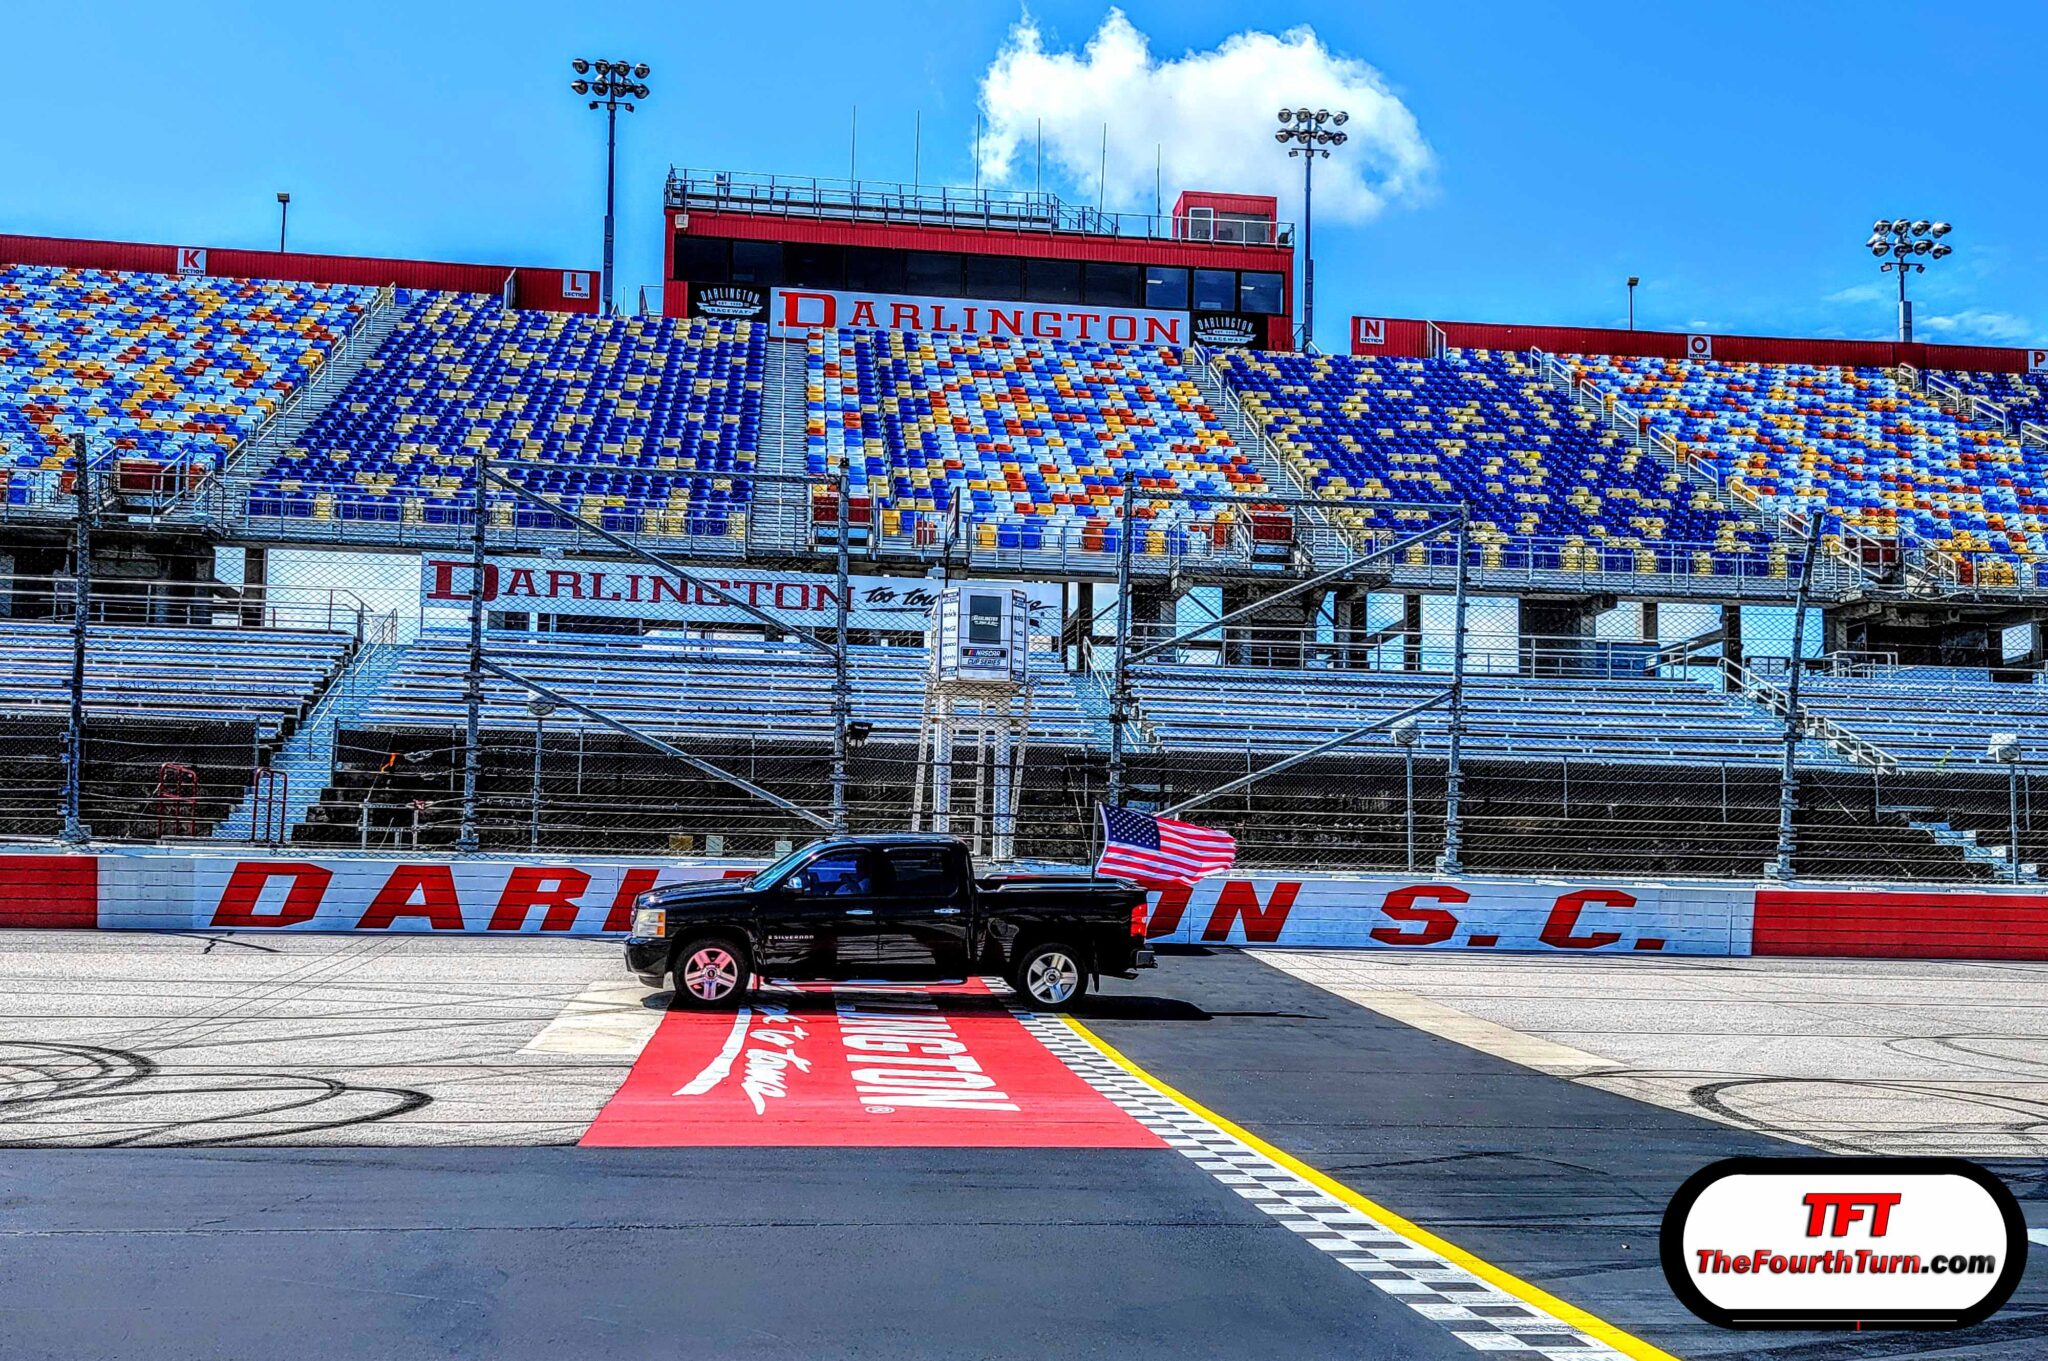 STORY & PHOTOS: August 2021 Track Laps for Charity at Darlington